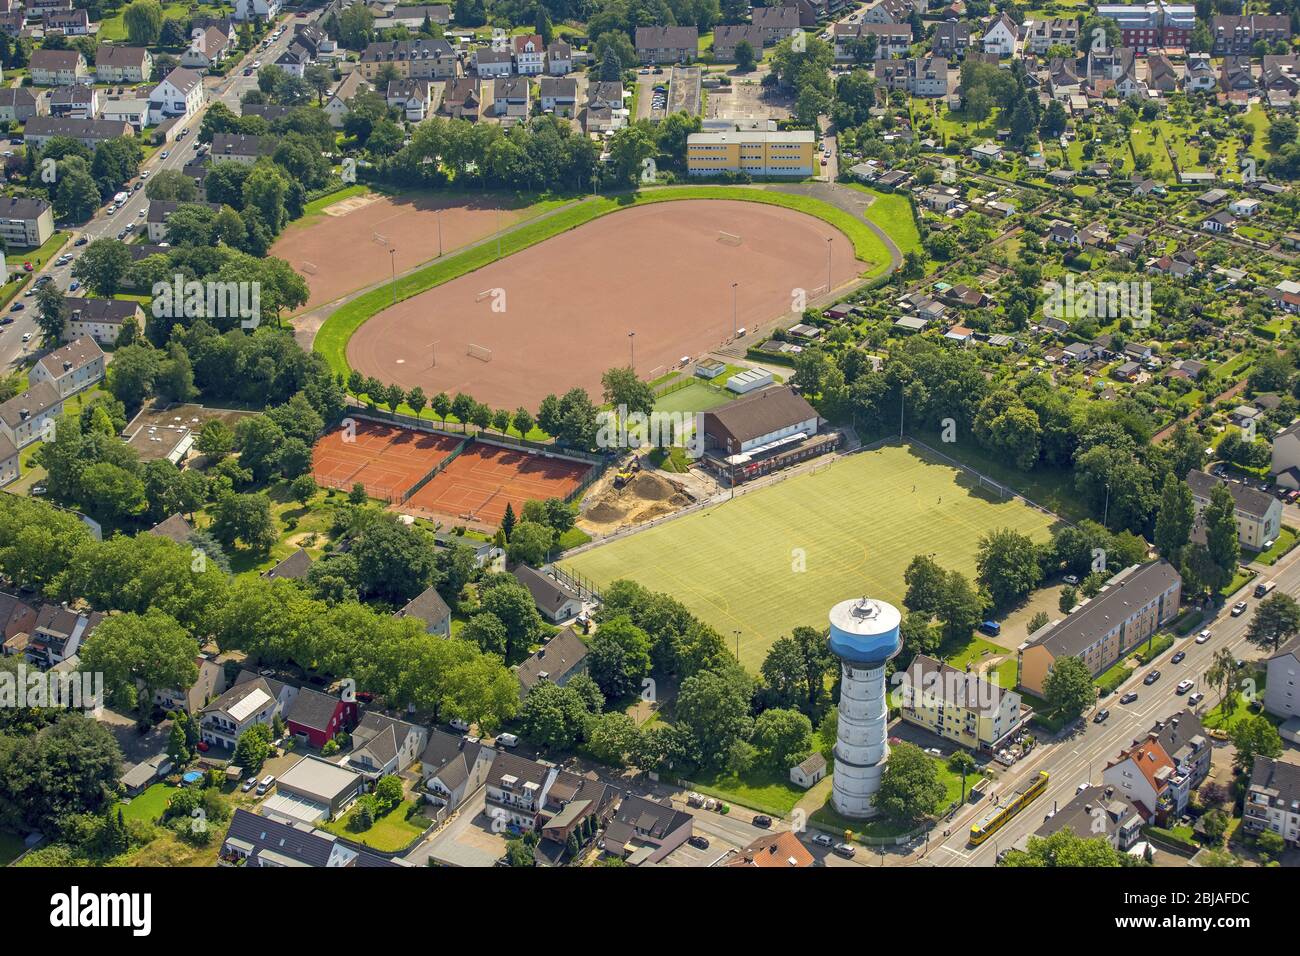 Sports grounds and football pitch from the DJK Adler Union Essen-Frintrop e. V. in Essen, 23.06.2016, aerial view, Germany, North Rhine-Westphalia, Ruhr Area, Essen Stock Photo